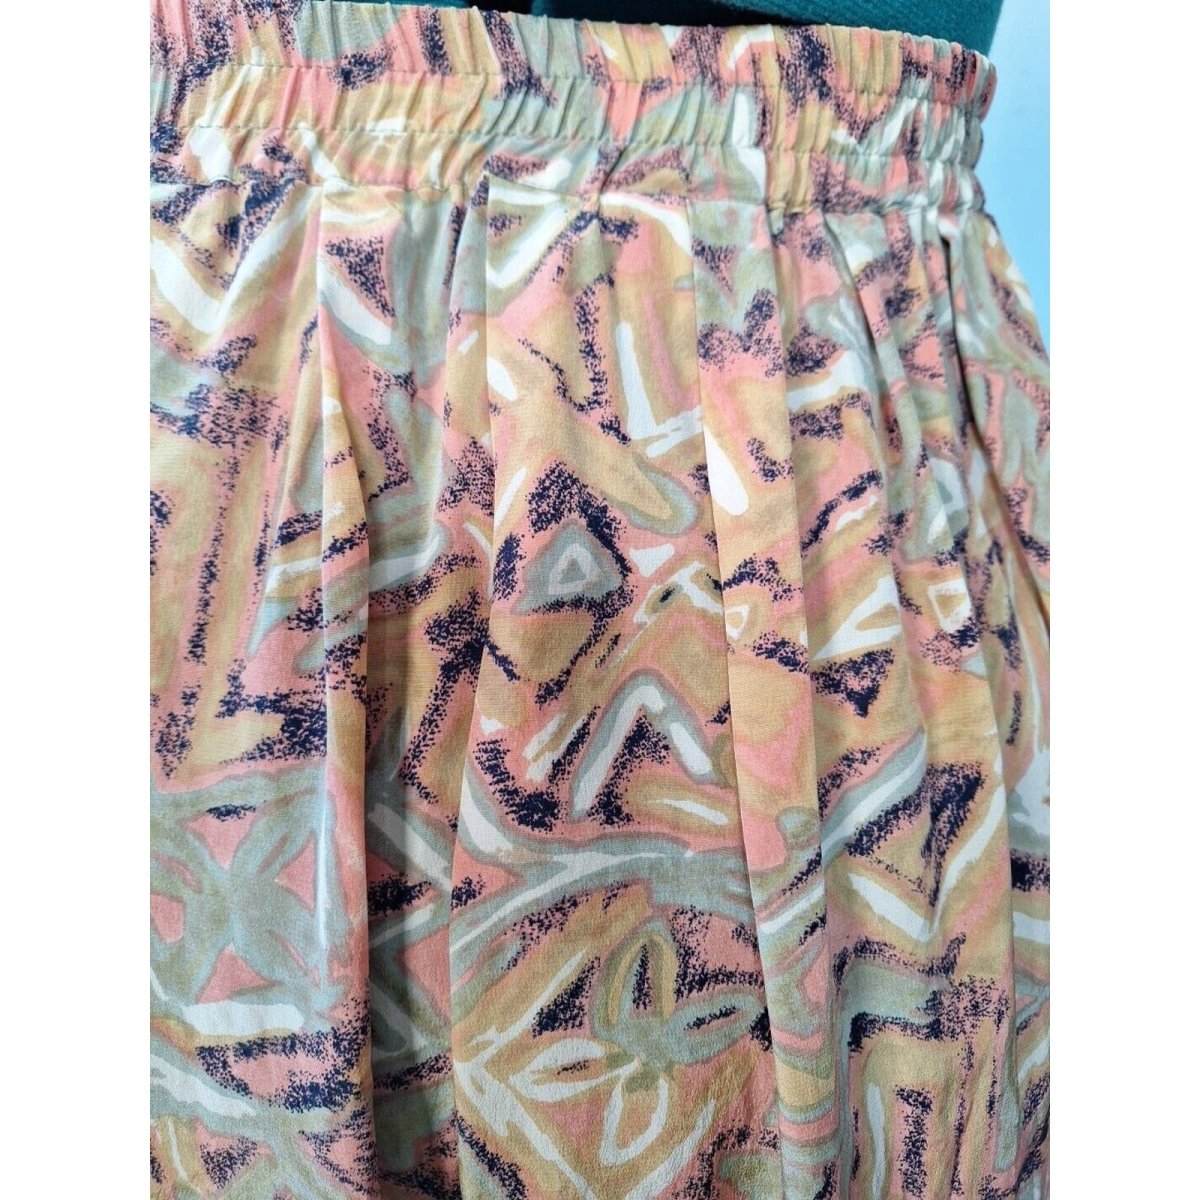 Vintage 80s Silk Abstract Print Skirt Women Size 14 - themallvintage The Mall Vintage